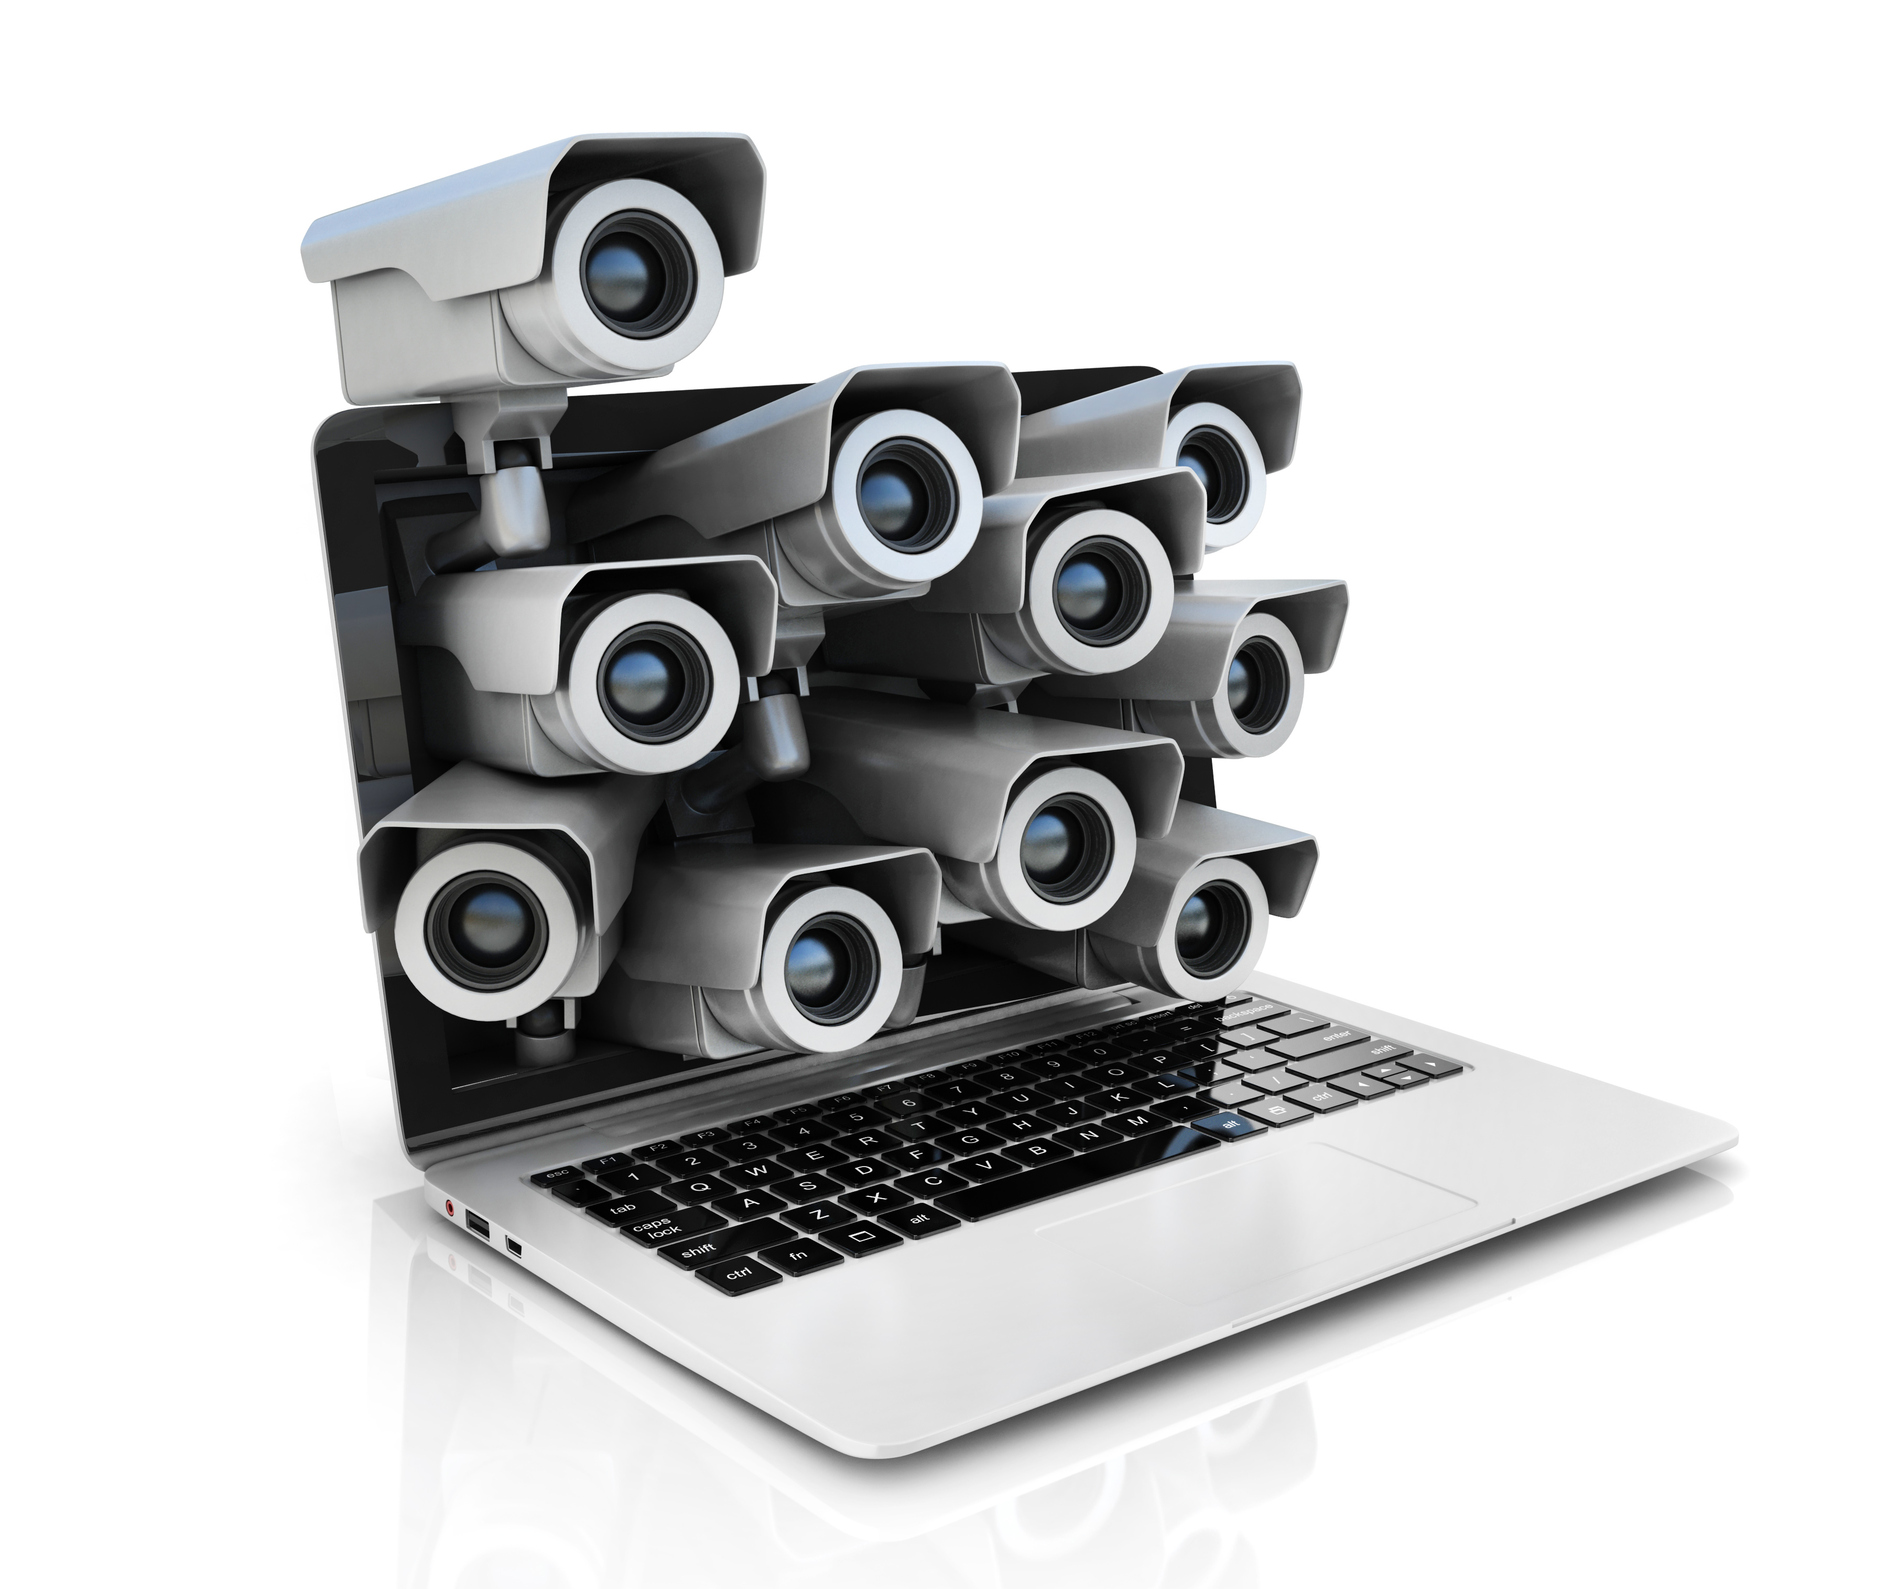 security cameras coming out of a laptop